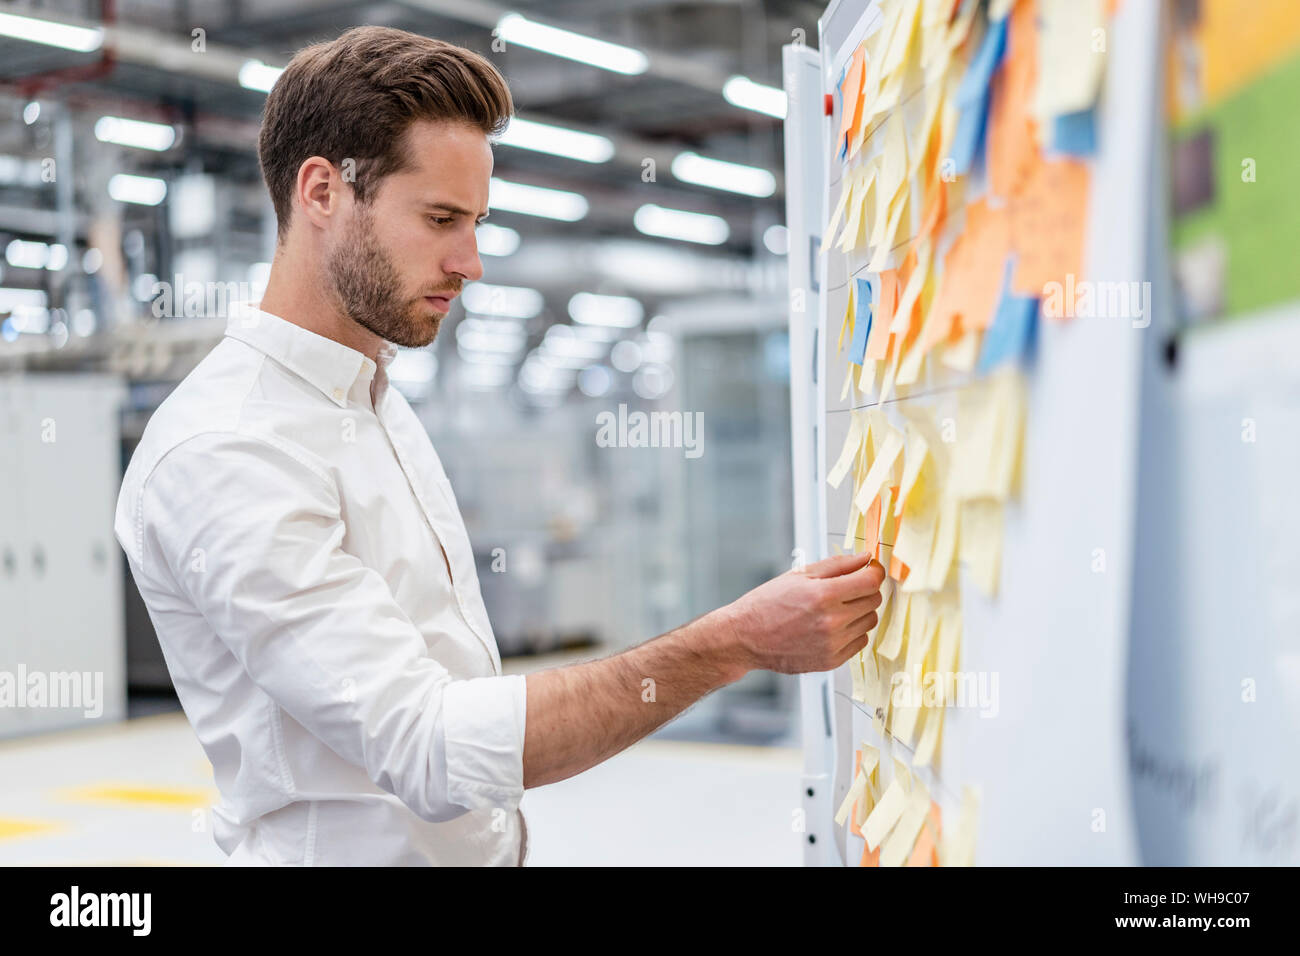 Businessman organizing adhesive notes on a board in a factory Stock Photo